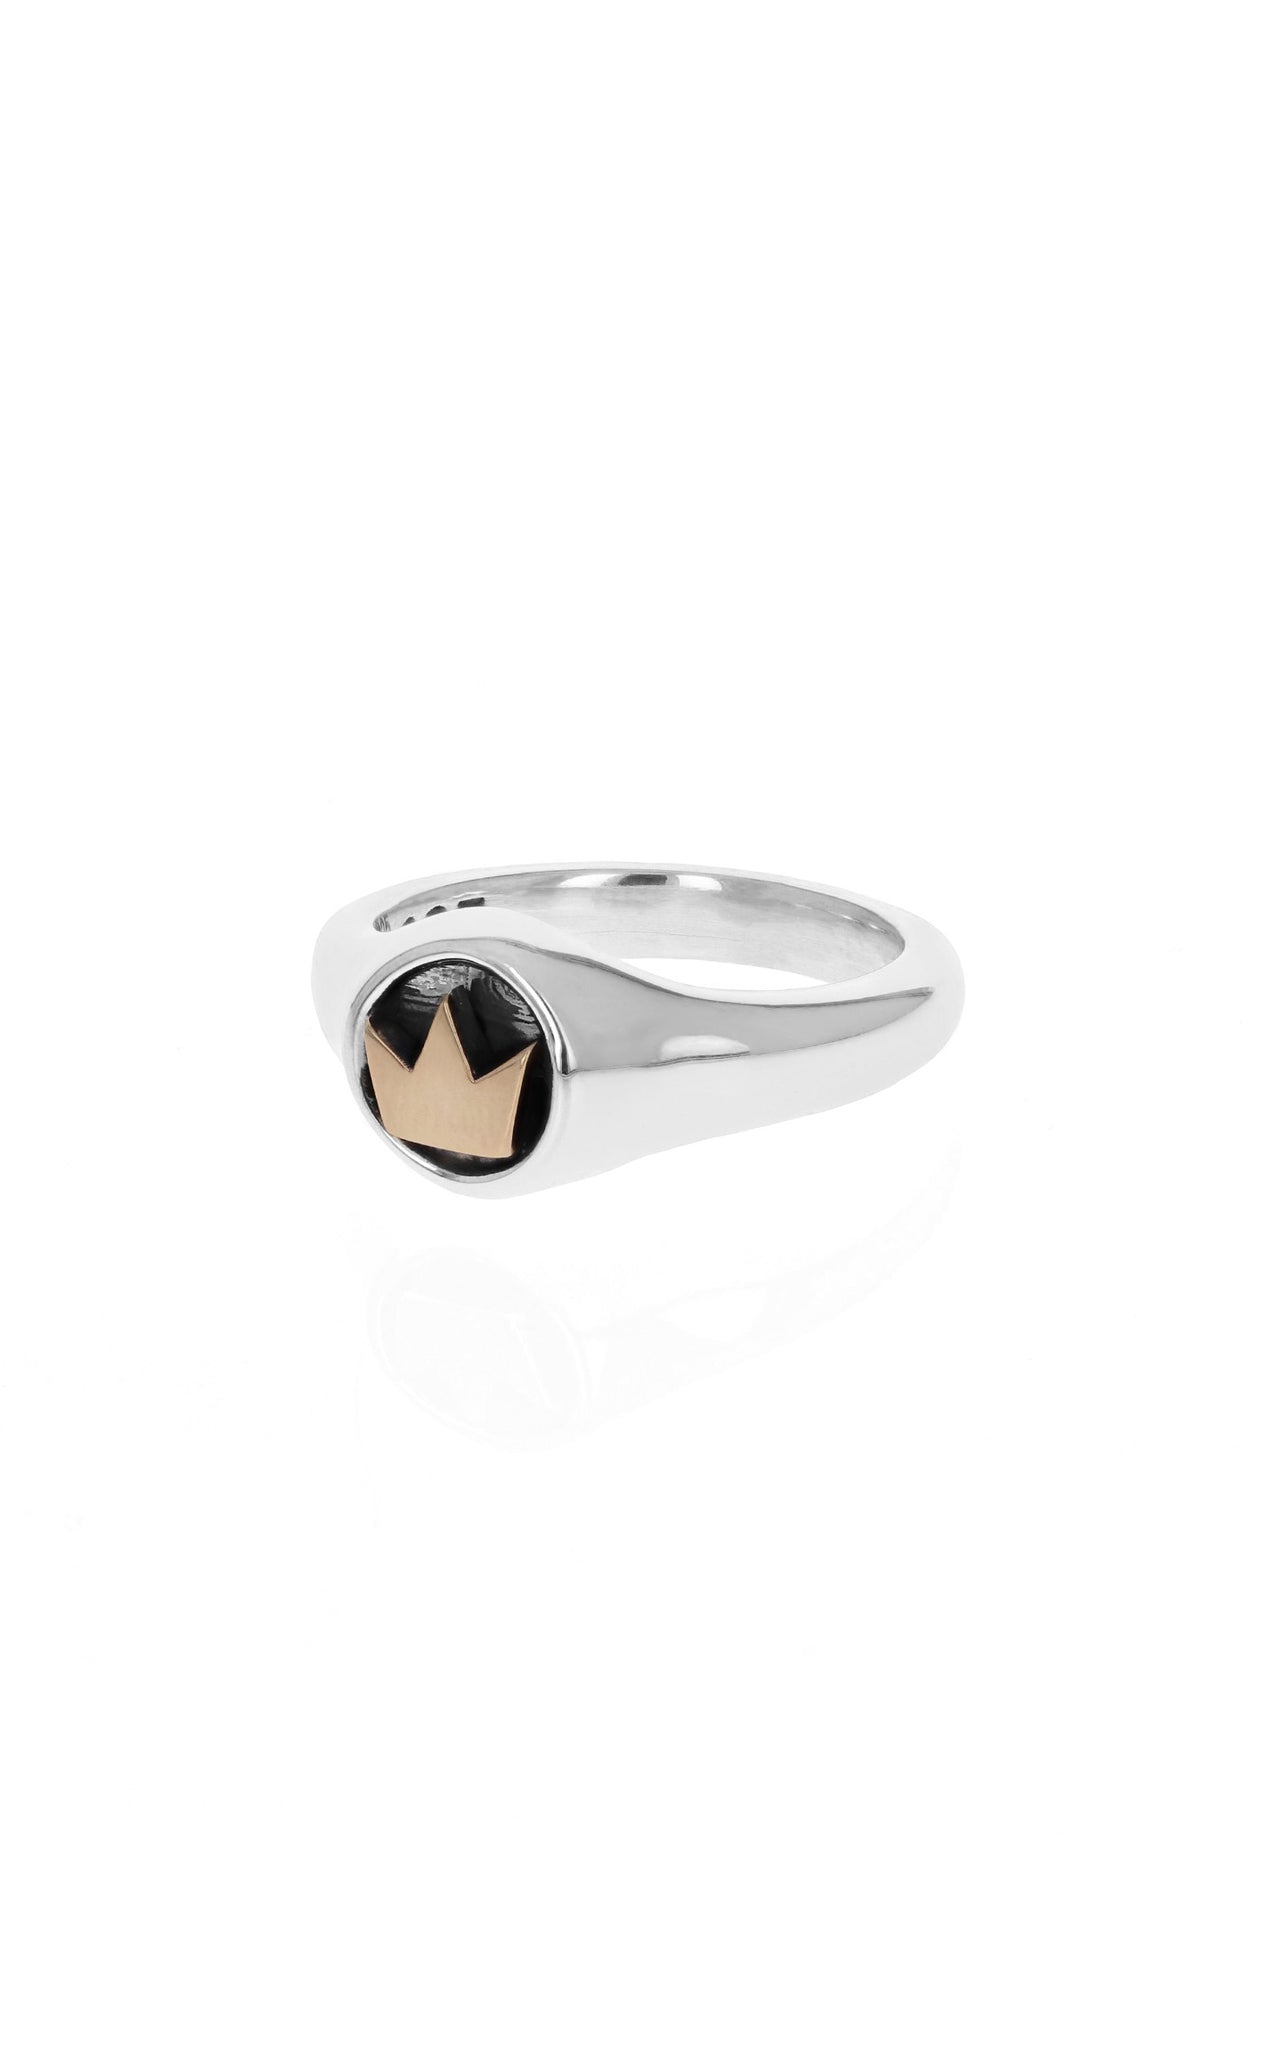 king baby small crown ring with gold alloy